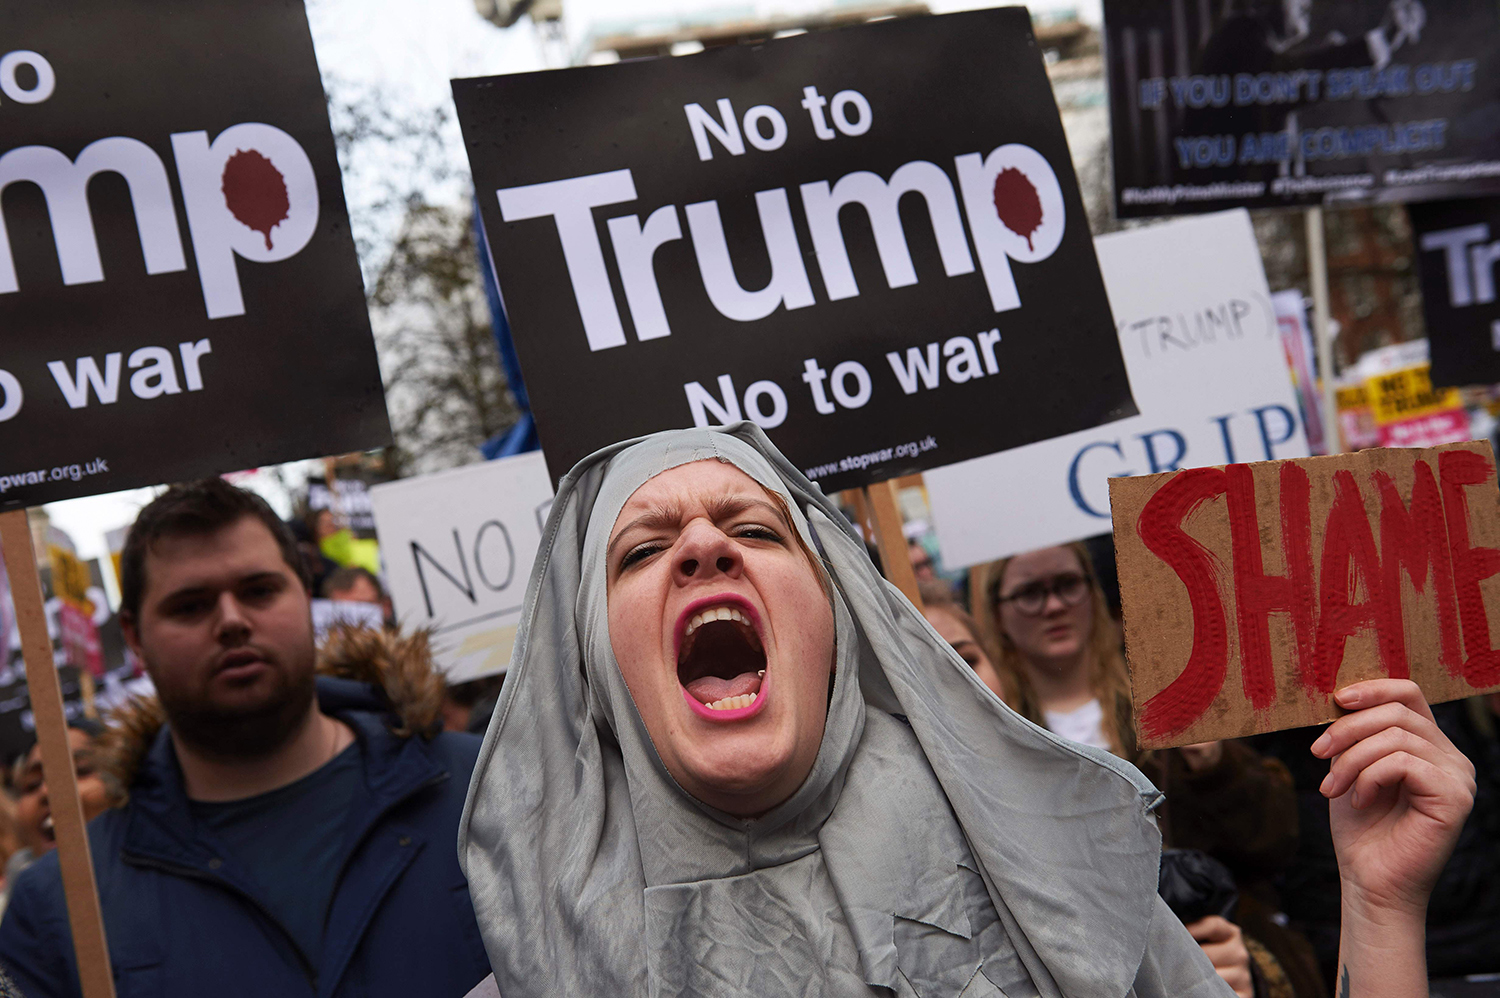 TOPSHOT - Demonstrators holding placards take part in a protest against US President Donald Trump outside the US Embassy in London on February 4, 2017. / AFP PHOTO / NIKLAS HALLE'N / TT / kod 444